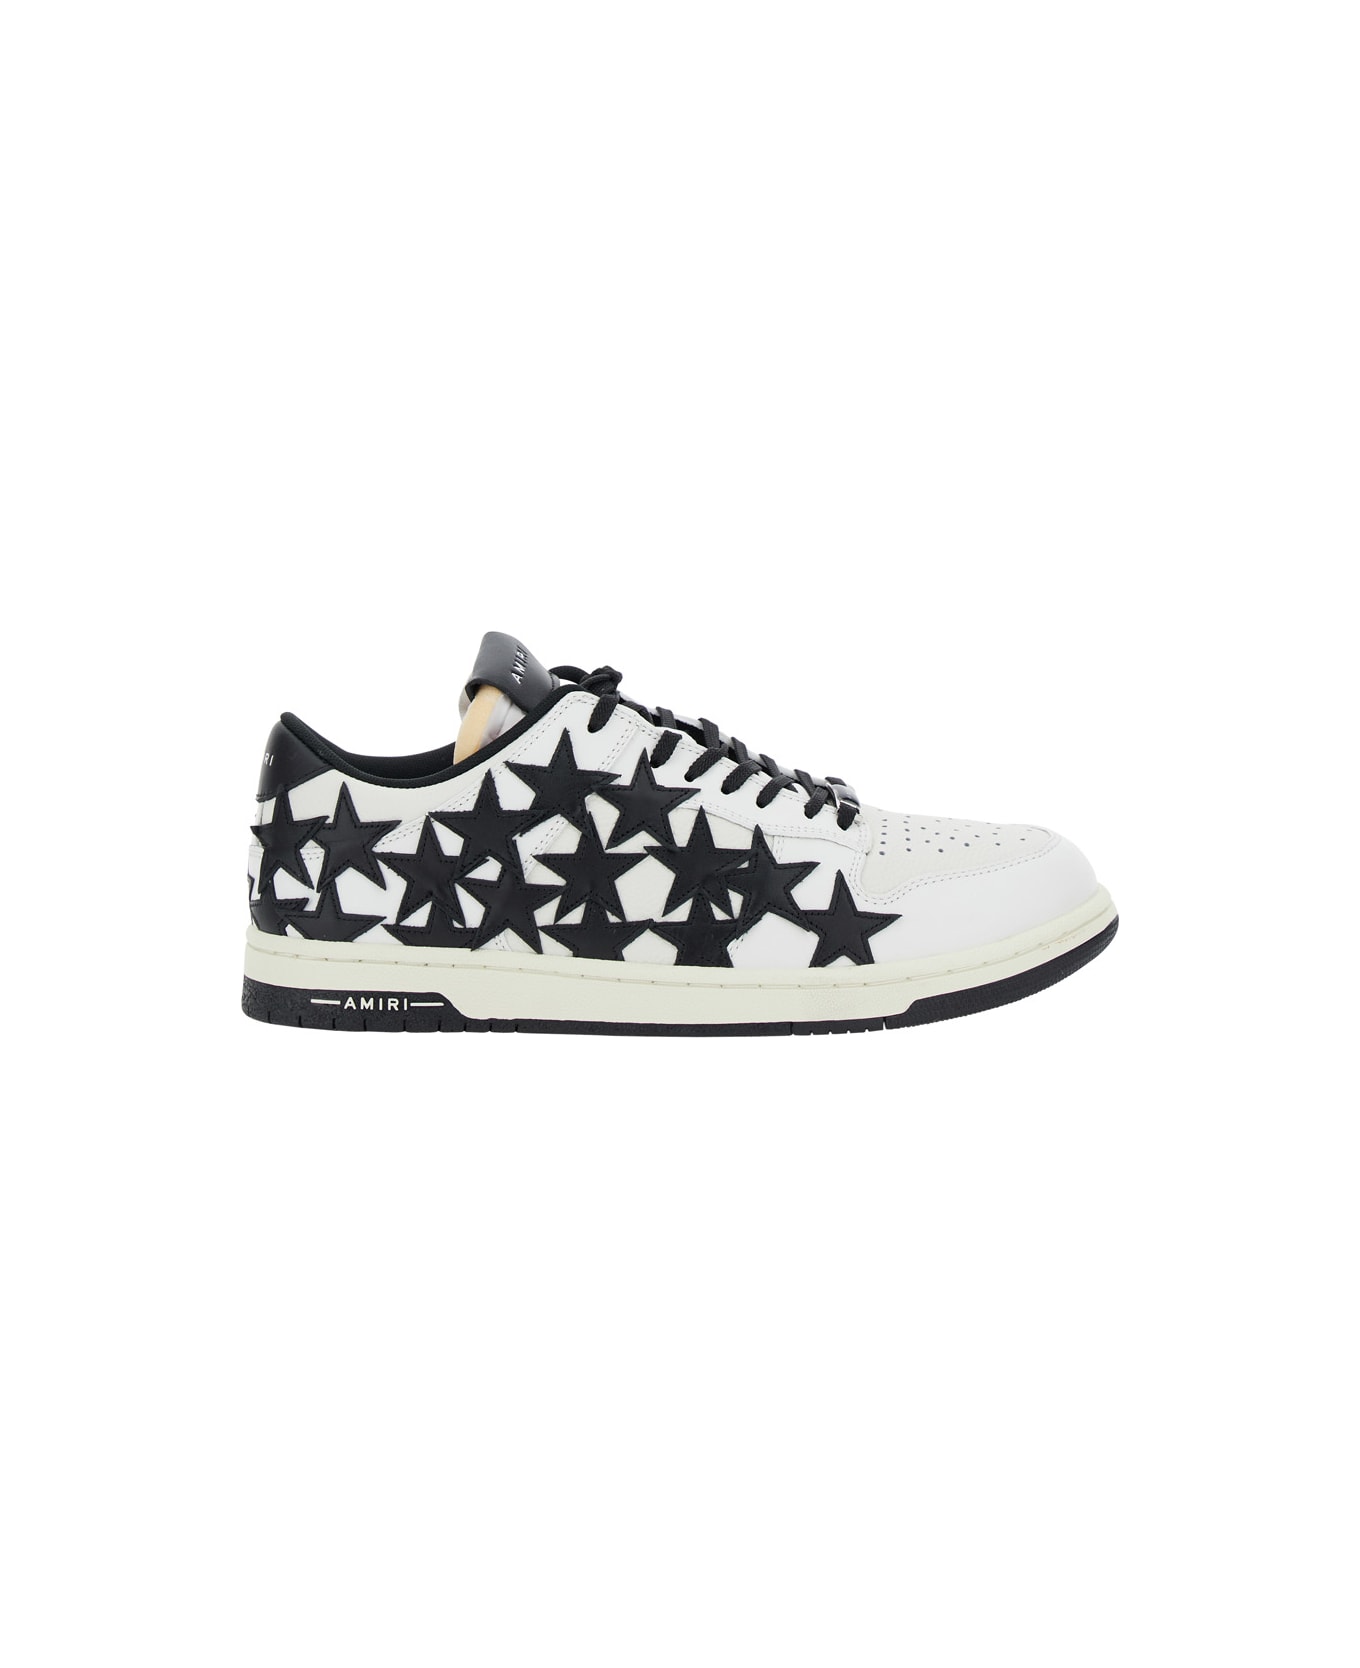 AMIRI Black And White Low Top Sneakers With Stars In Leather Man - White